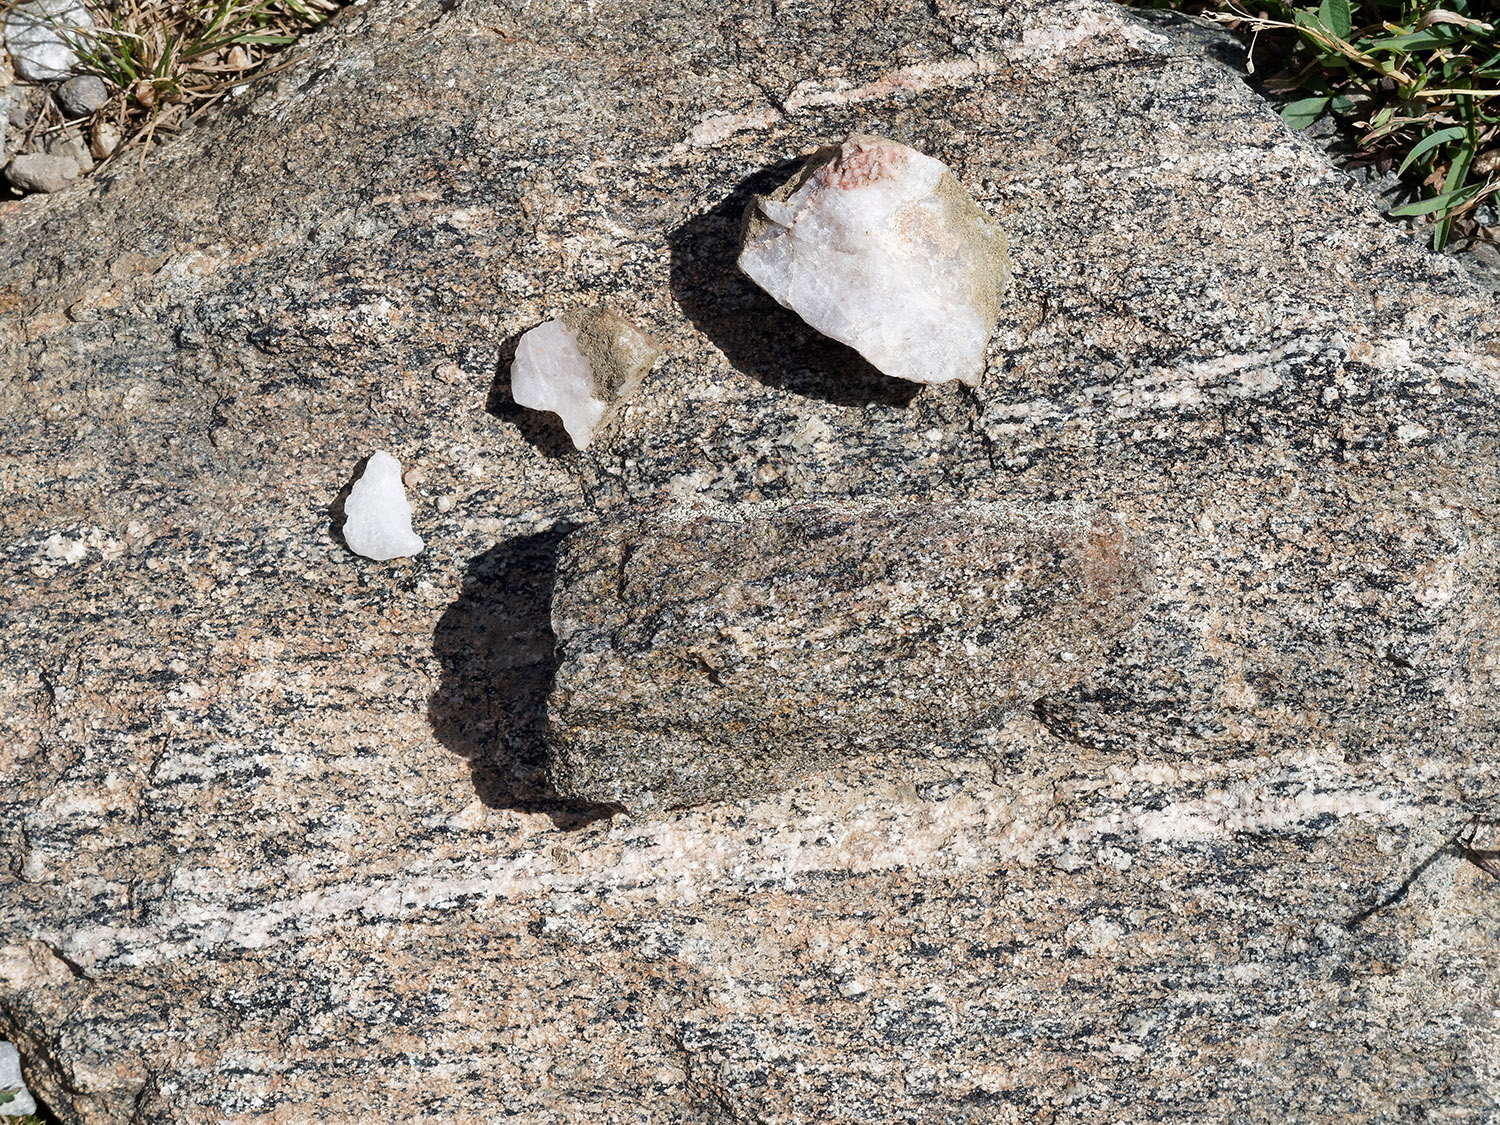 Lighter colored pegmatite, a quartz-rich igneous rock, sits on granitic gneiss a metamorphic rock which forms most of the Precambrian rock surface (>540 MA) at Beartooth Pass and Plateau.